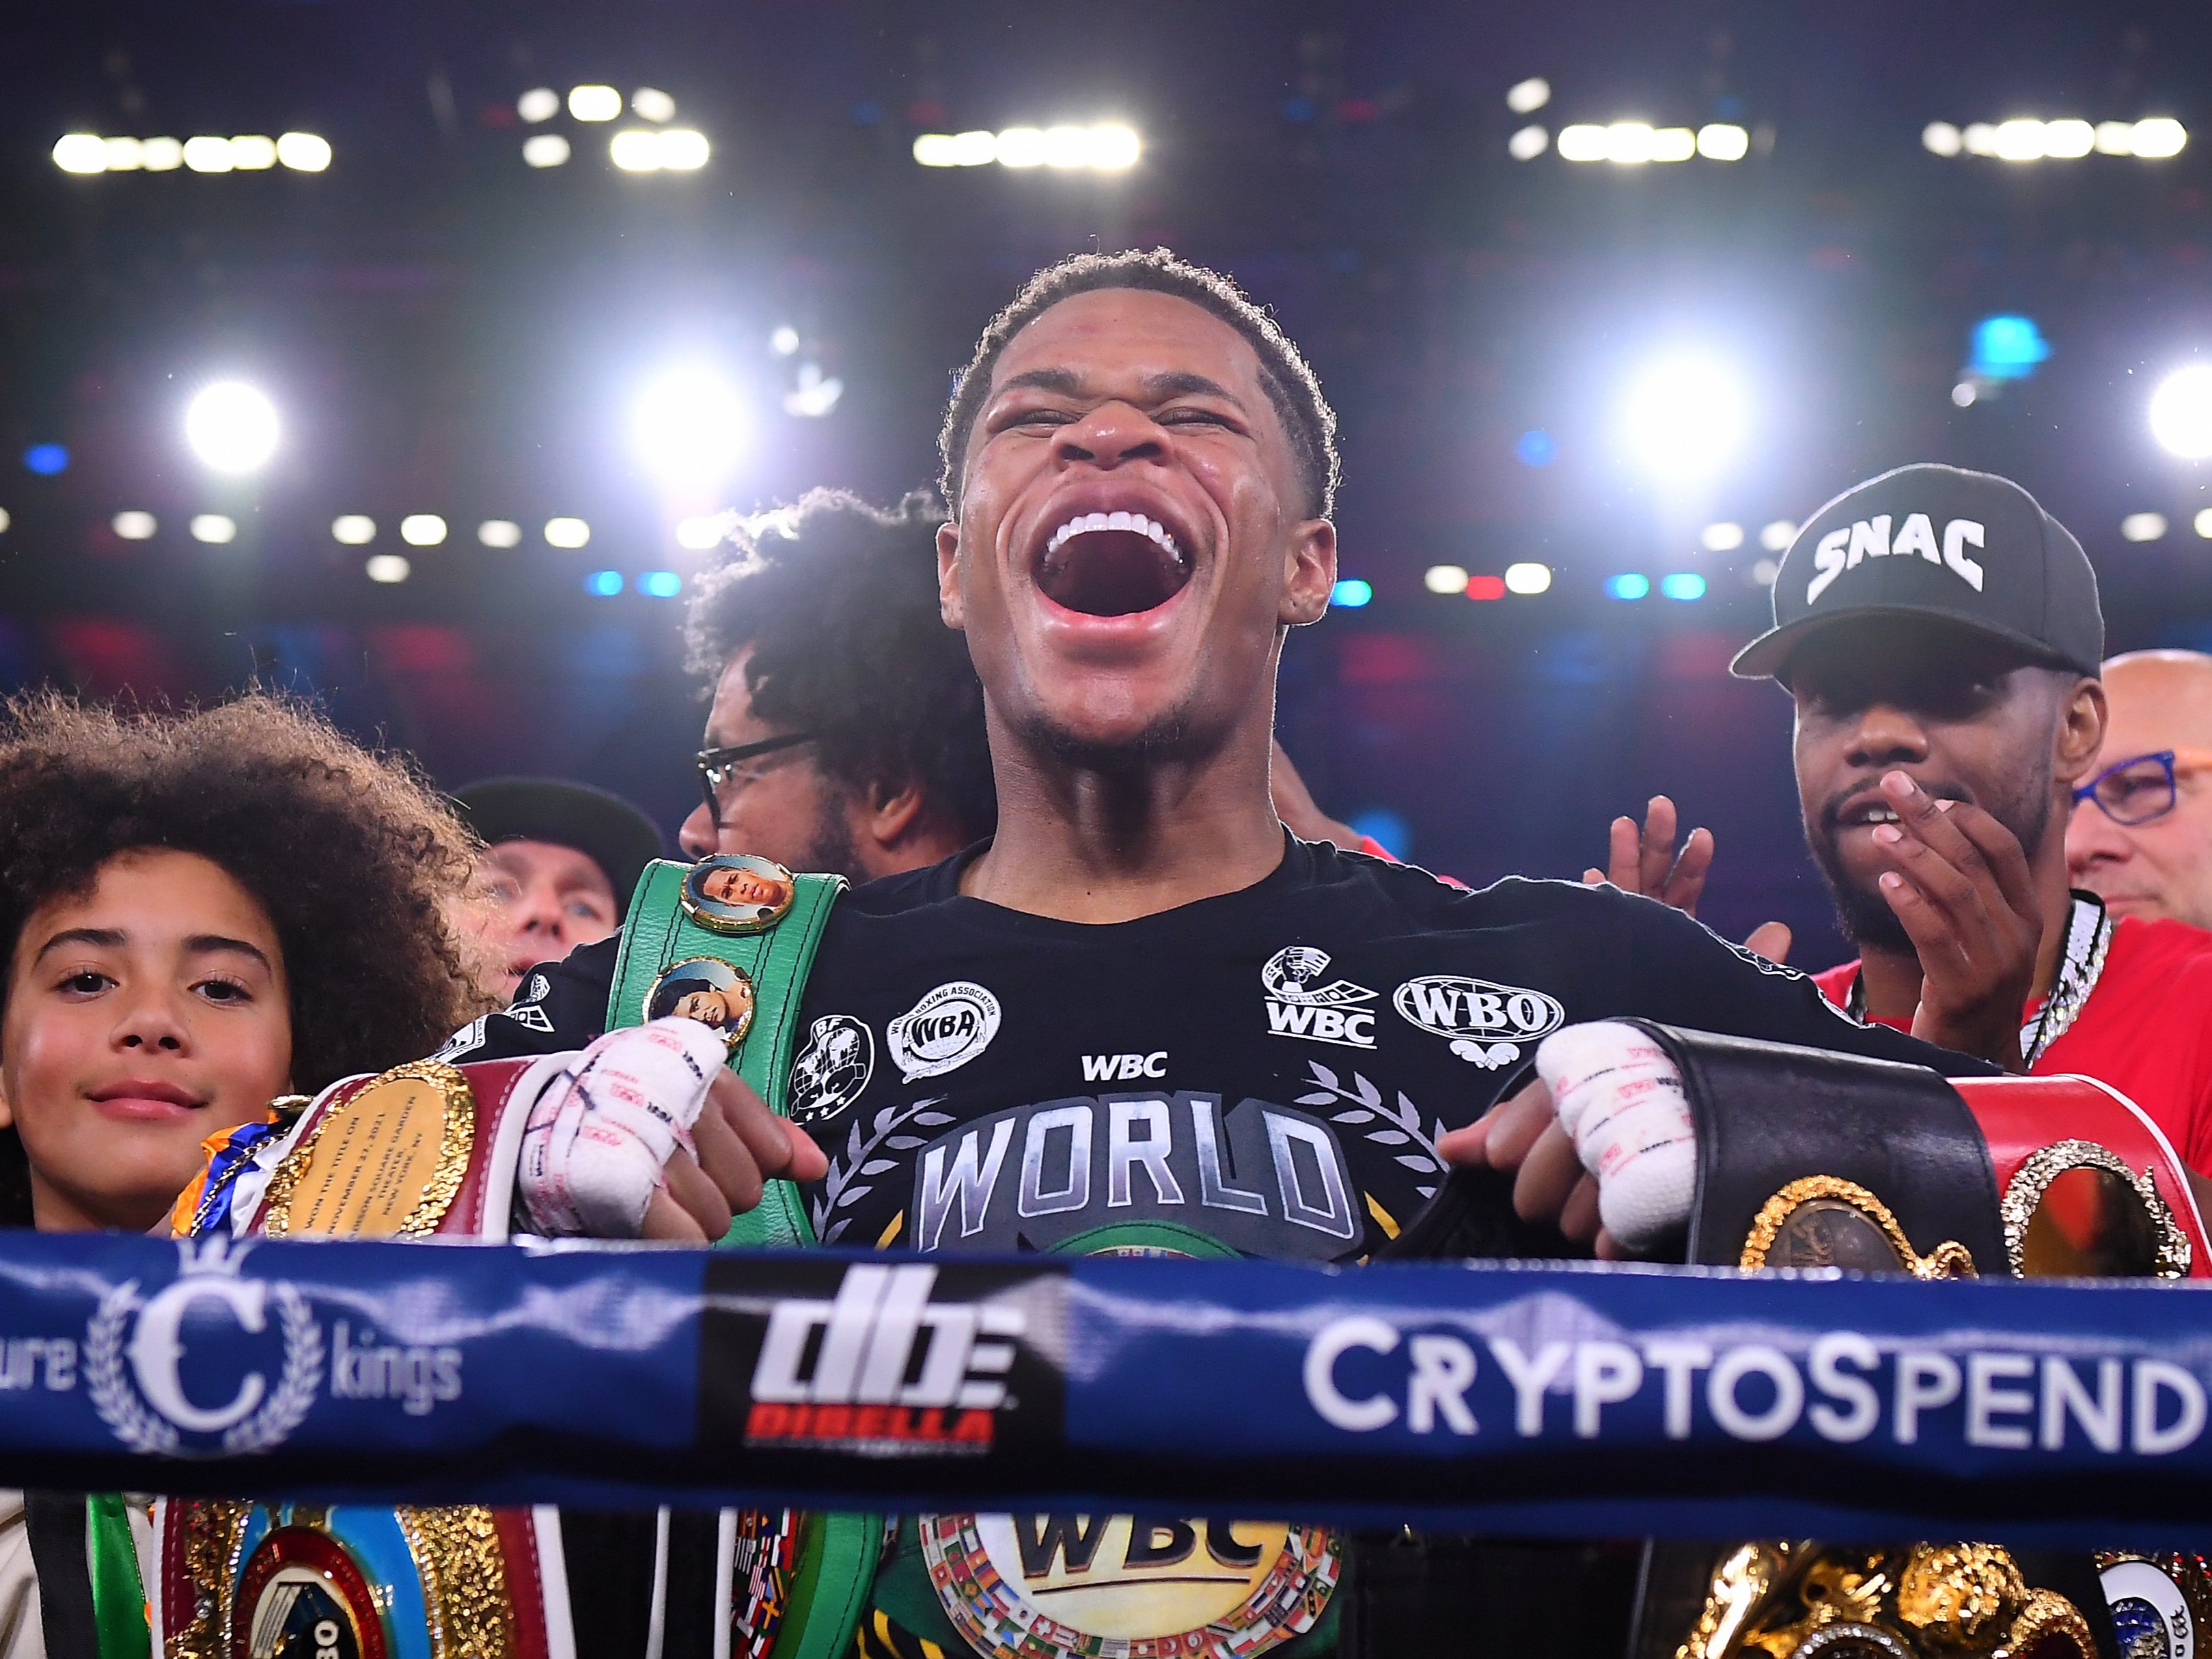 Devin Haney celebrates becoming undisputed lightweight champion against George Kambosos Jr